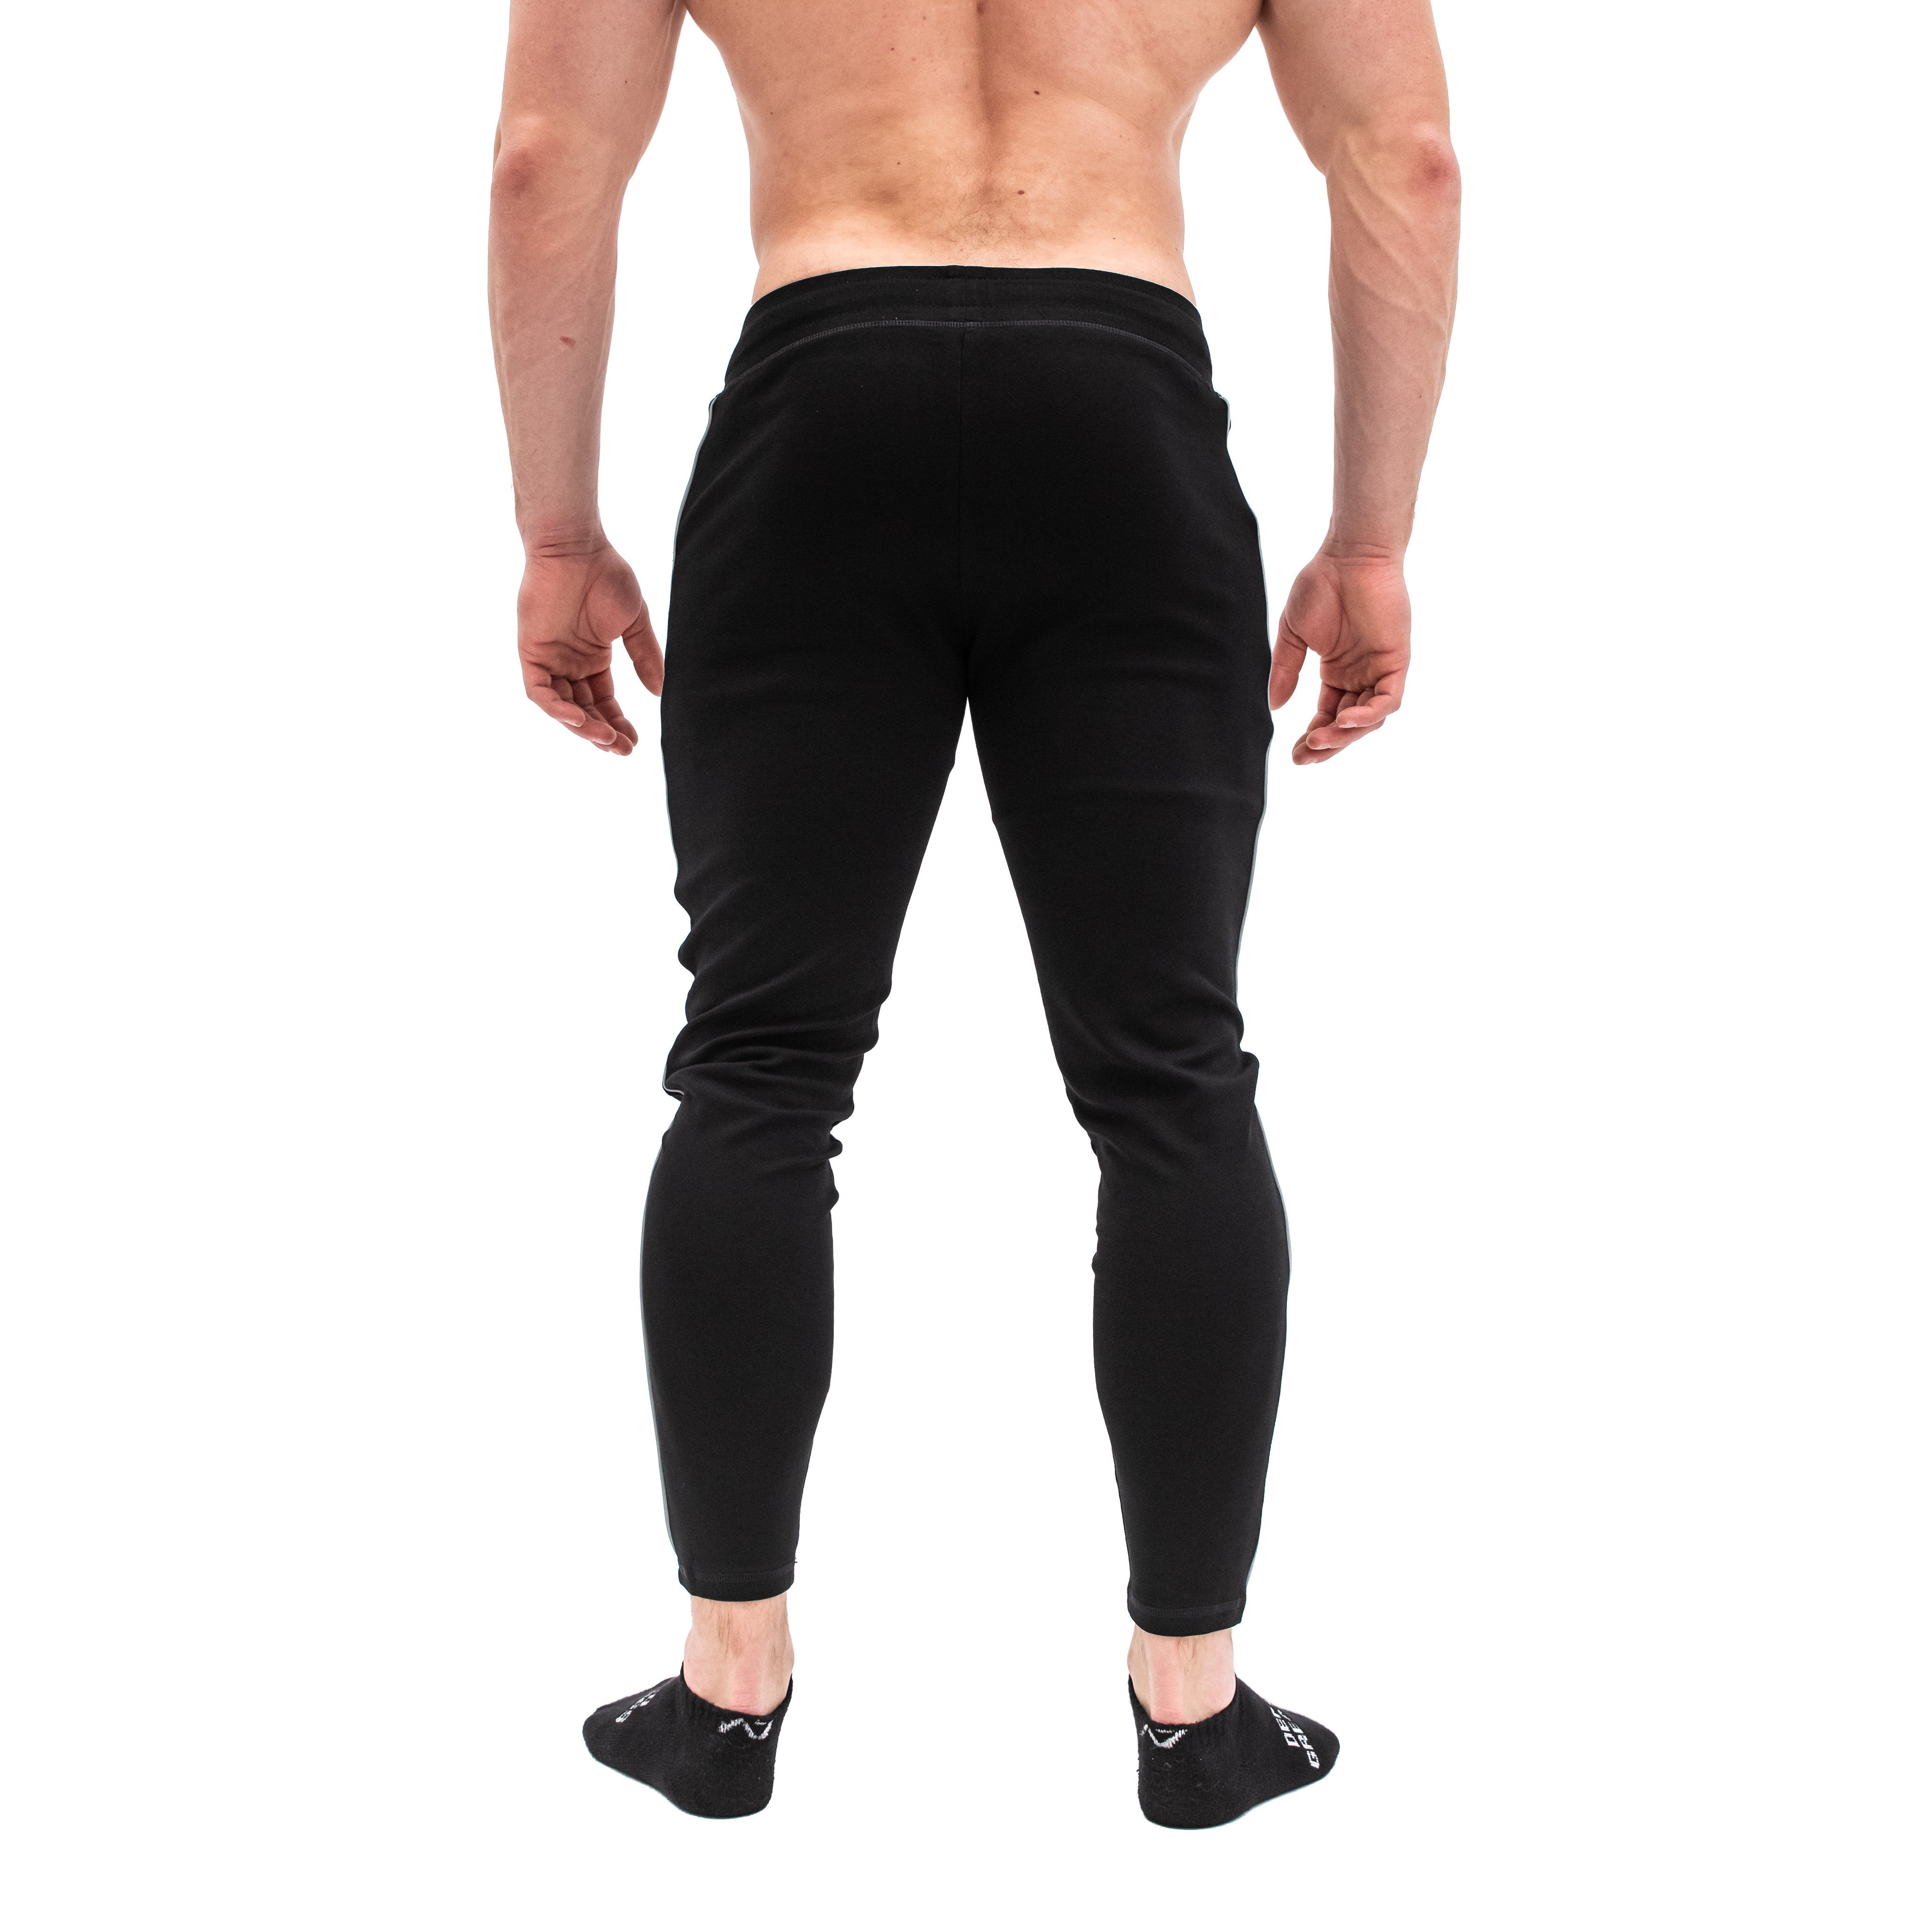 When we set out to create our Moxie Joggers we knew they had to meet the high standard we established with our Defy Joggers.We wanted to introduce some new elements that we felt could bring joy in both your comfort and style!